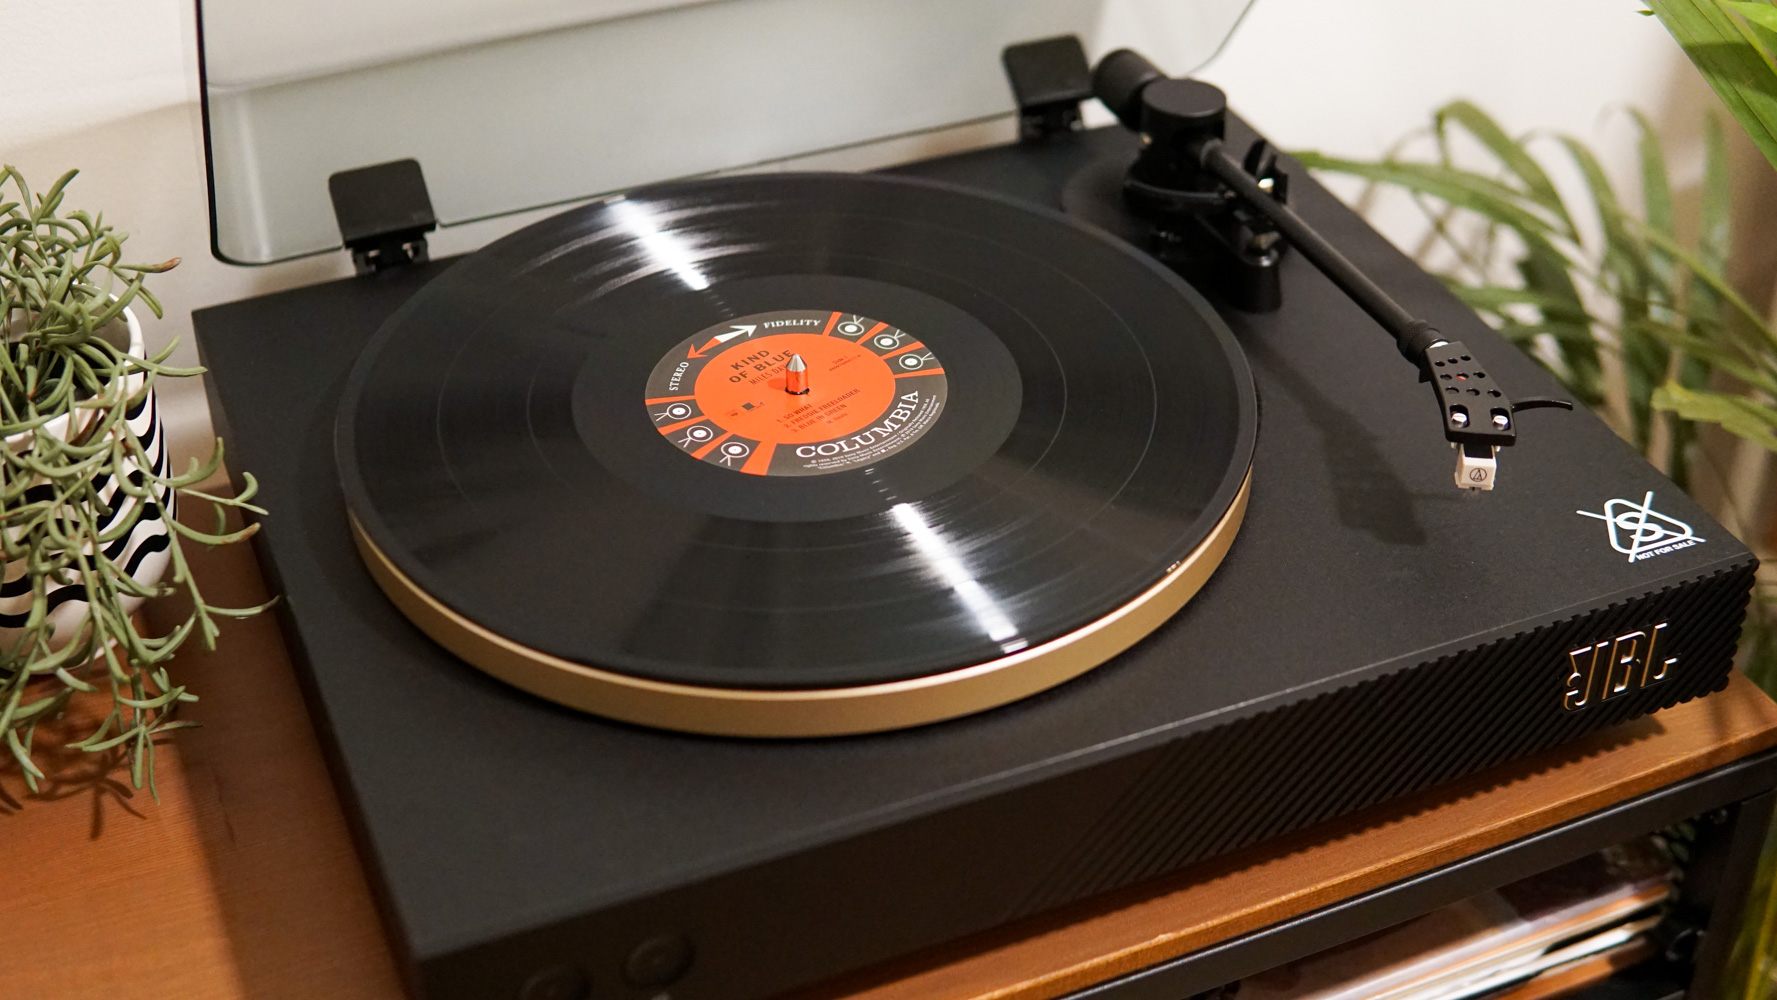 Vinyl Record Fan? You’ll Want This Gorgeous Speaker and Turntable Combo From JBL | JBL Spinner BT, JBL Authentics | JBL Turntable, JBL Speakers